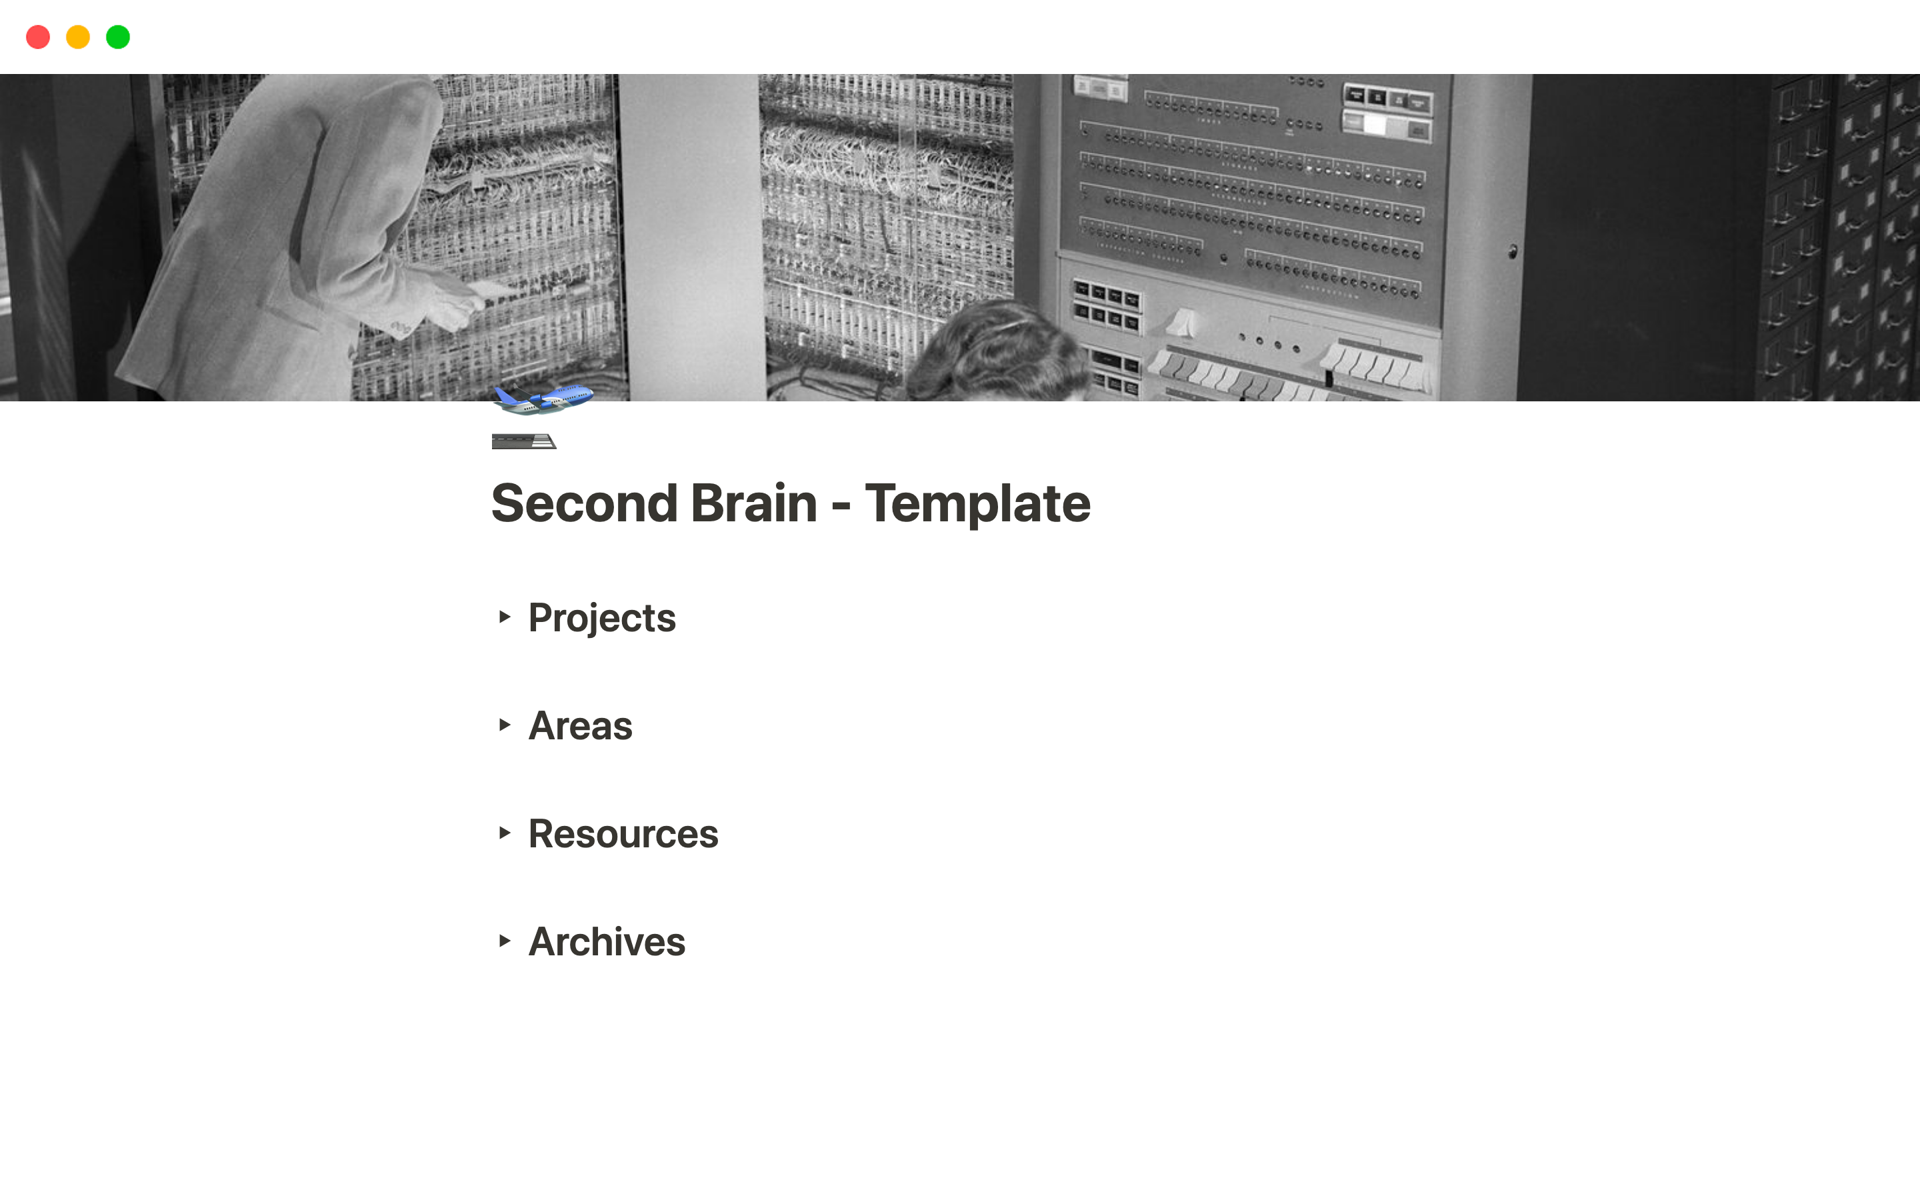 A free template to create a second brain from all your notes, knowledge, and experiences.